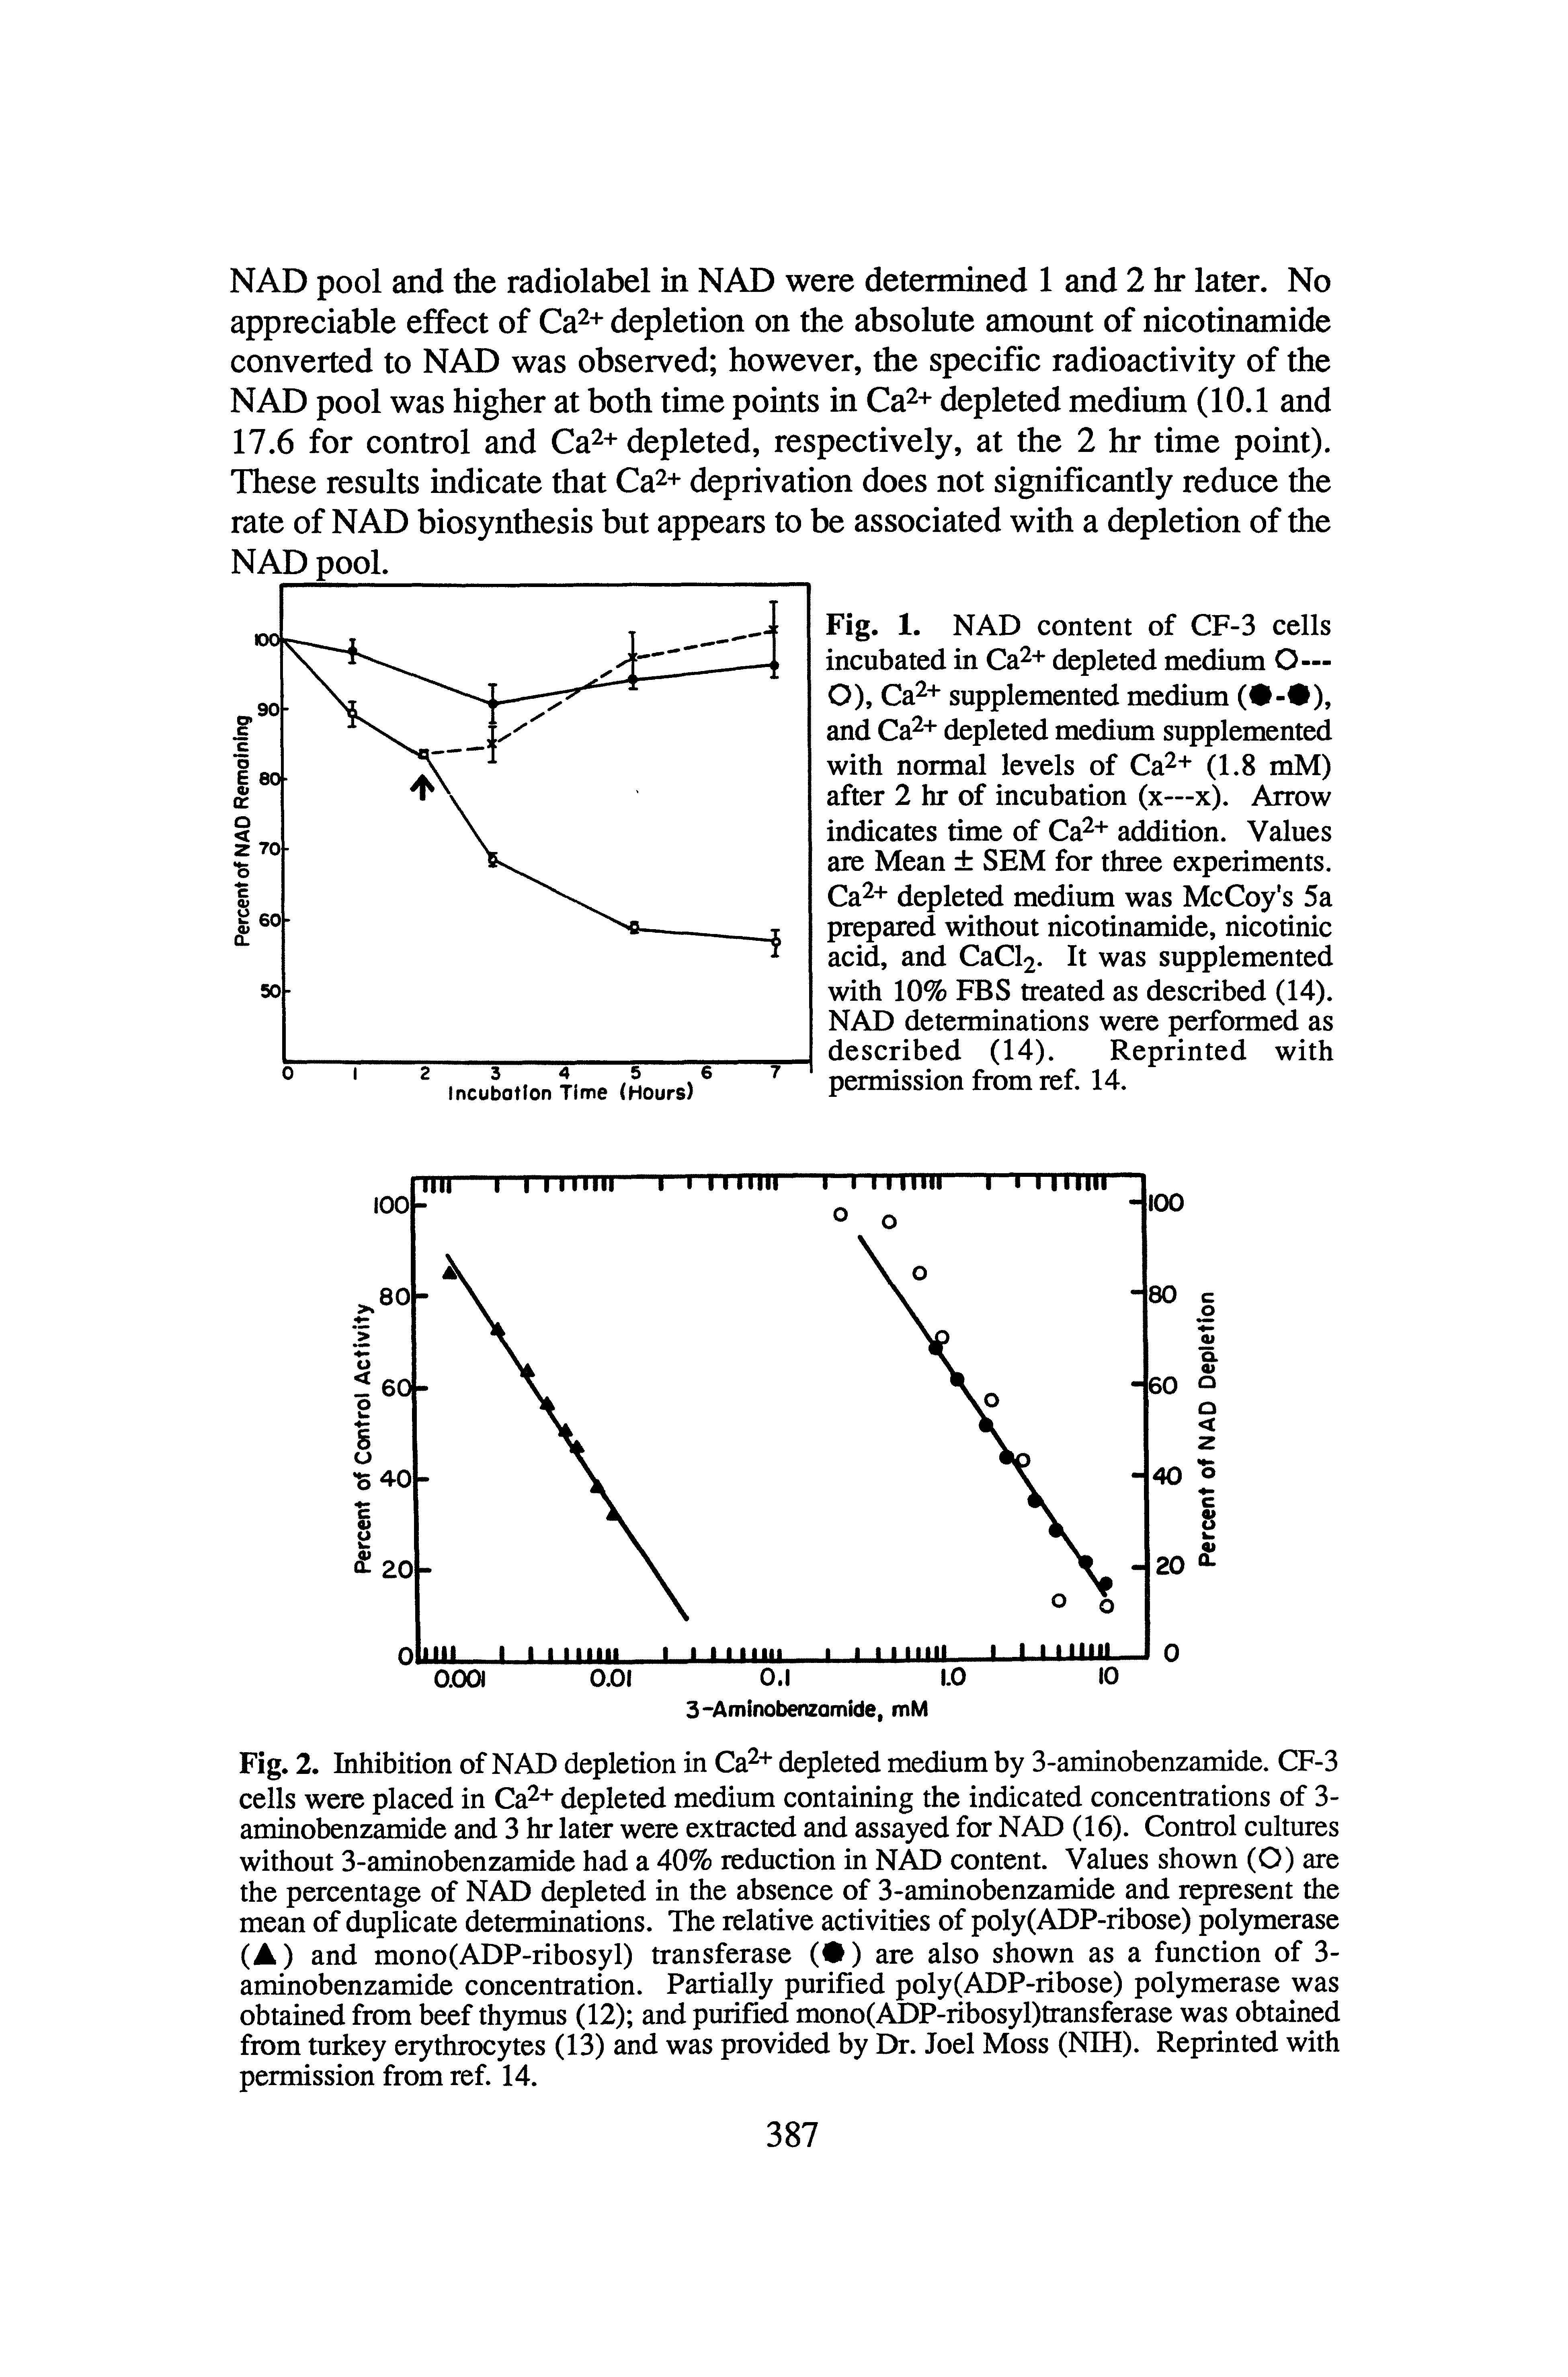 Fig. 1. NAD content of CF-3 cells incubated in Ca + depleted medium O— O), Ca + supplemented medium ( - ), and Ca + depleted medium supplemented with normal levels of Ca + (1.8 mM) after 2 hr of incubation (x—x). Arrow indicates time of Ca + addition. Values are Mean SEM for three experiments. Ca + depleted medium was McCoy s 5a prepared without nicotinamide, nicotinic acid, and CaCl2. It was supplemented with 10% FBS treated as described (14). NAD determinations were performed as described (14). Reprinted with permission from ref. 14.